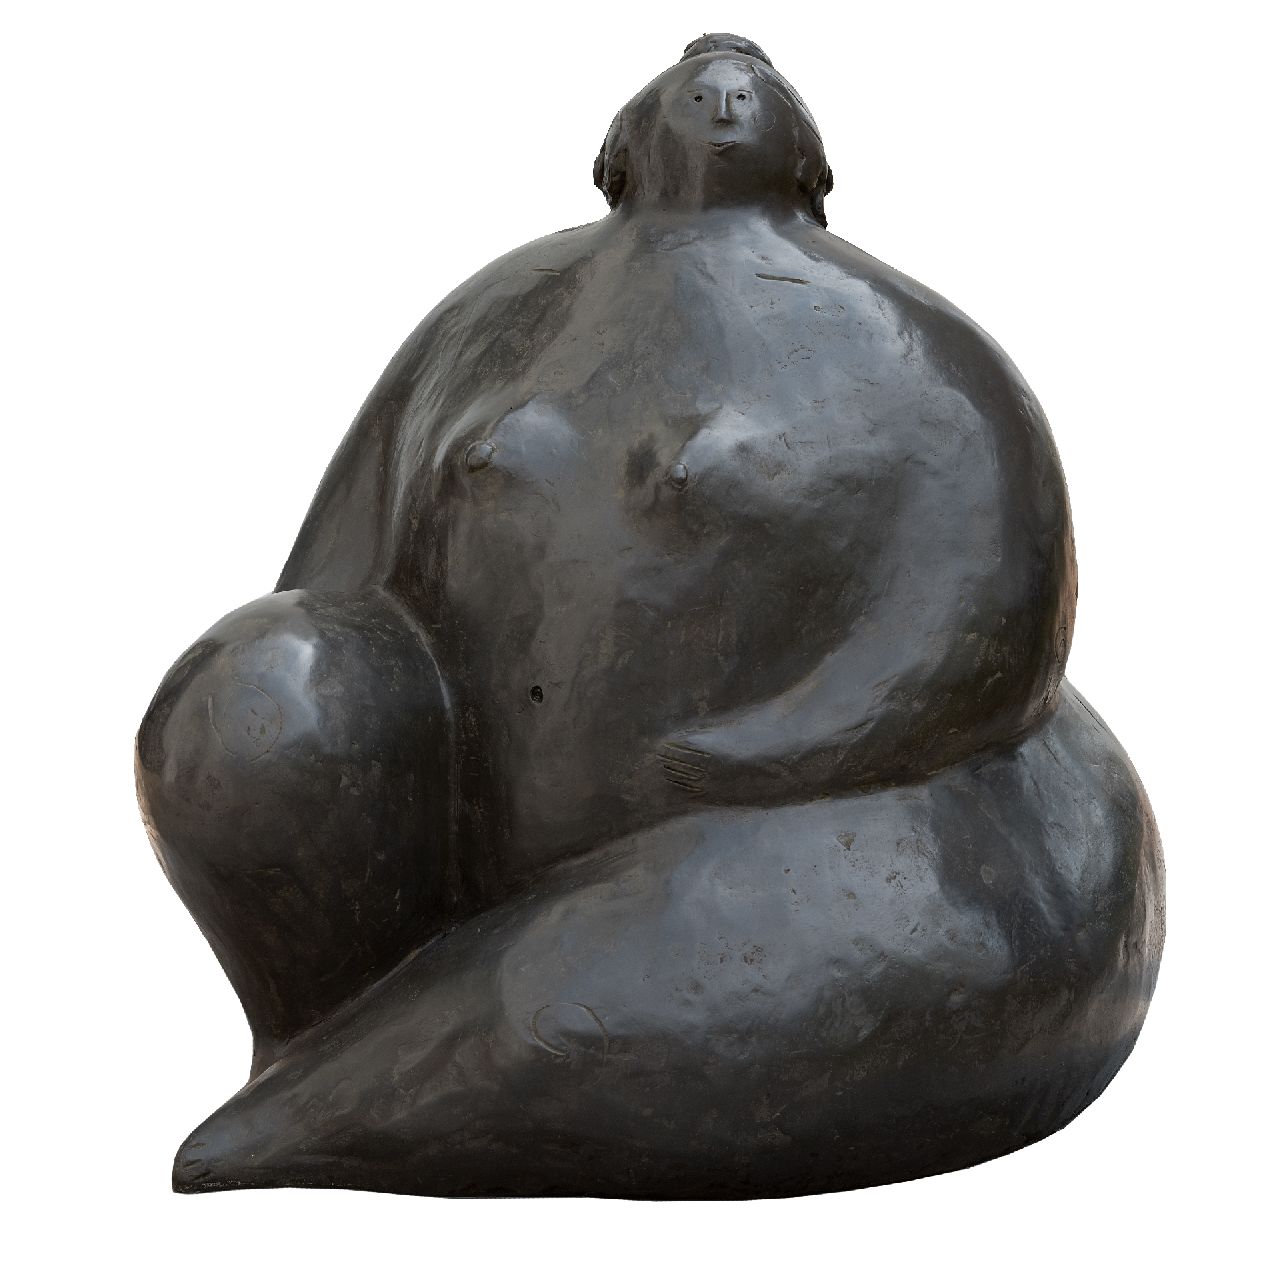 Hemert E. van | Evert van Hemert | Sculptures and objects offered for sale | Saskia, patinated bronze 65.0 x 55.0 cm, signed with monogram on the side